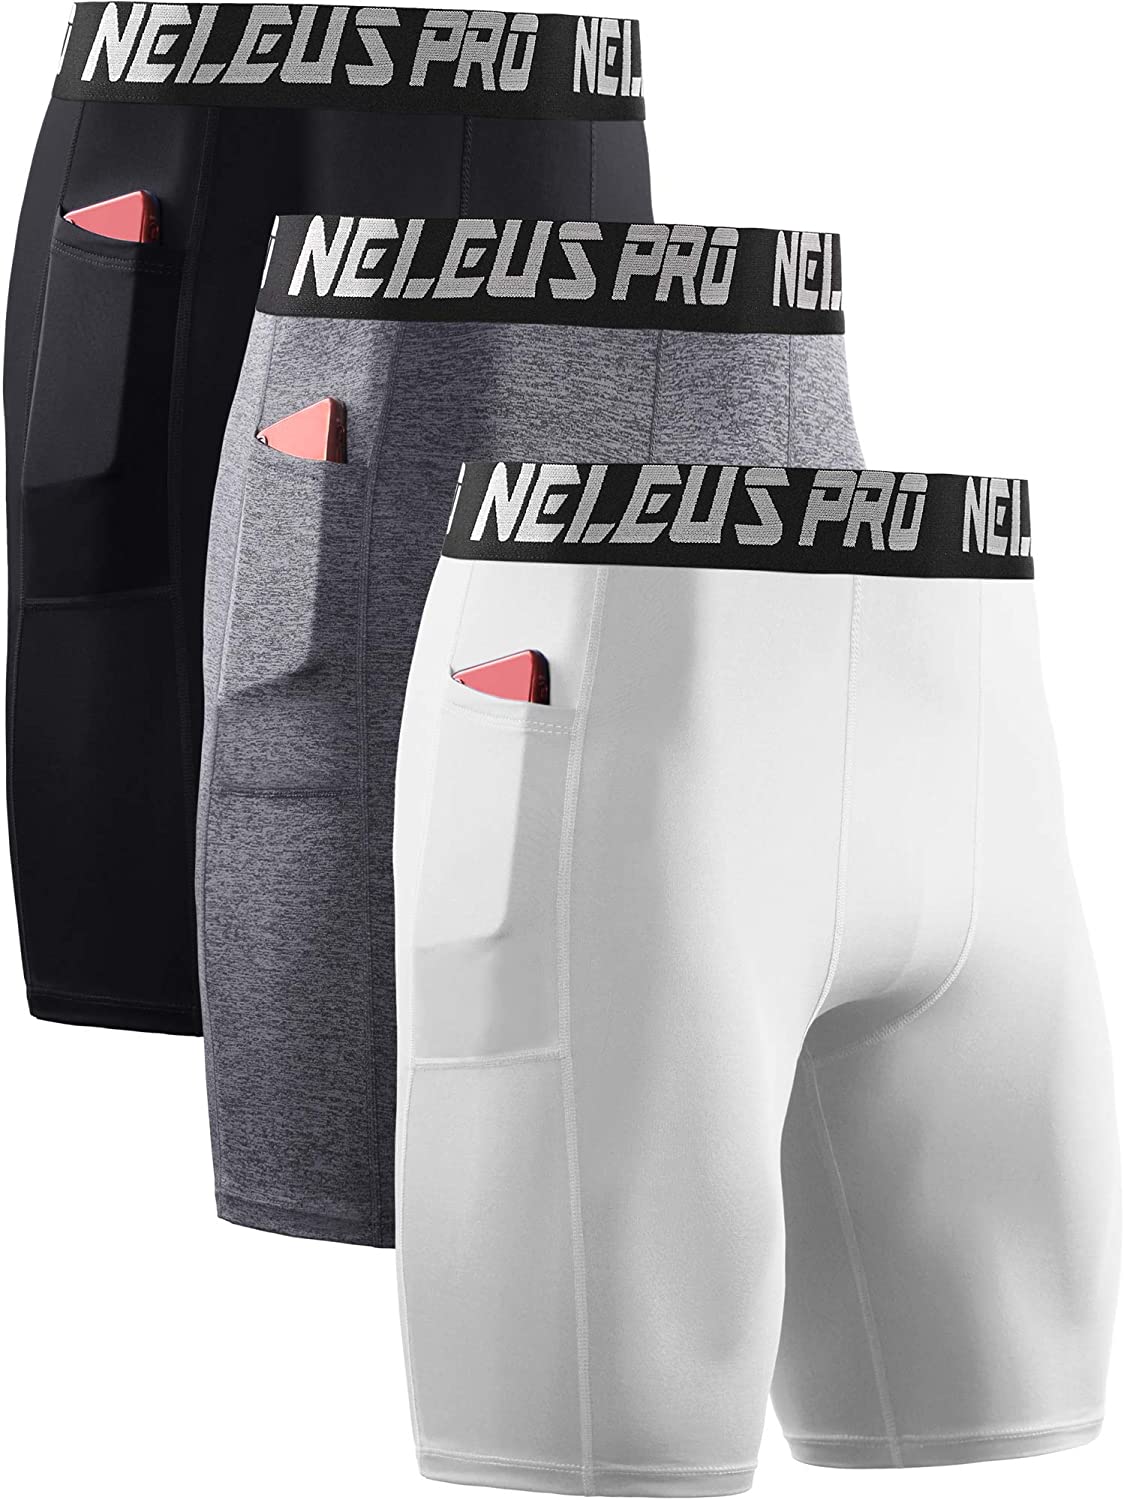 Neleus Mens Dry Fit Performance Short with Pockets